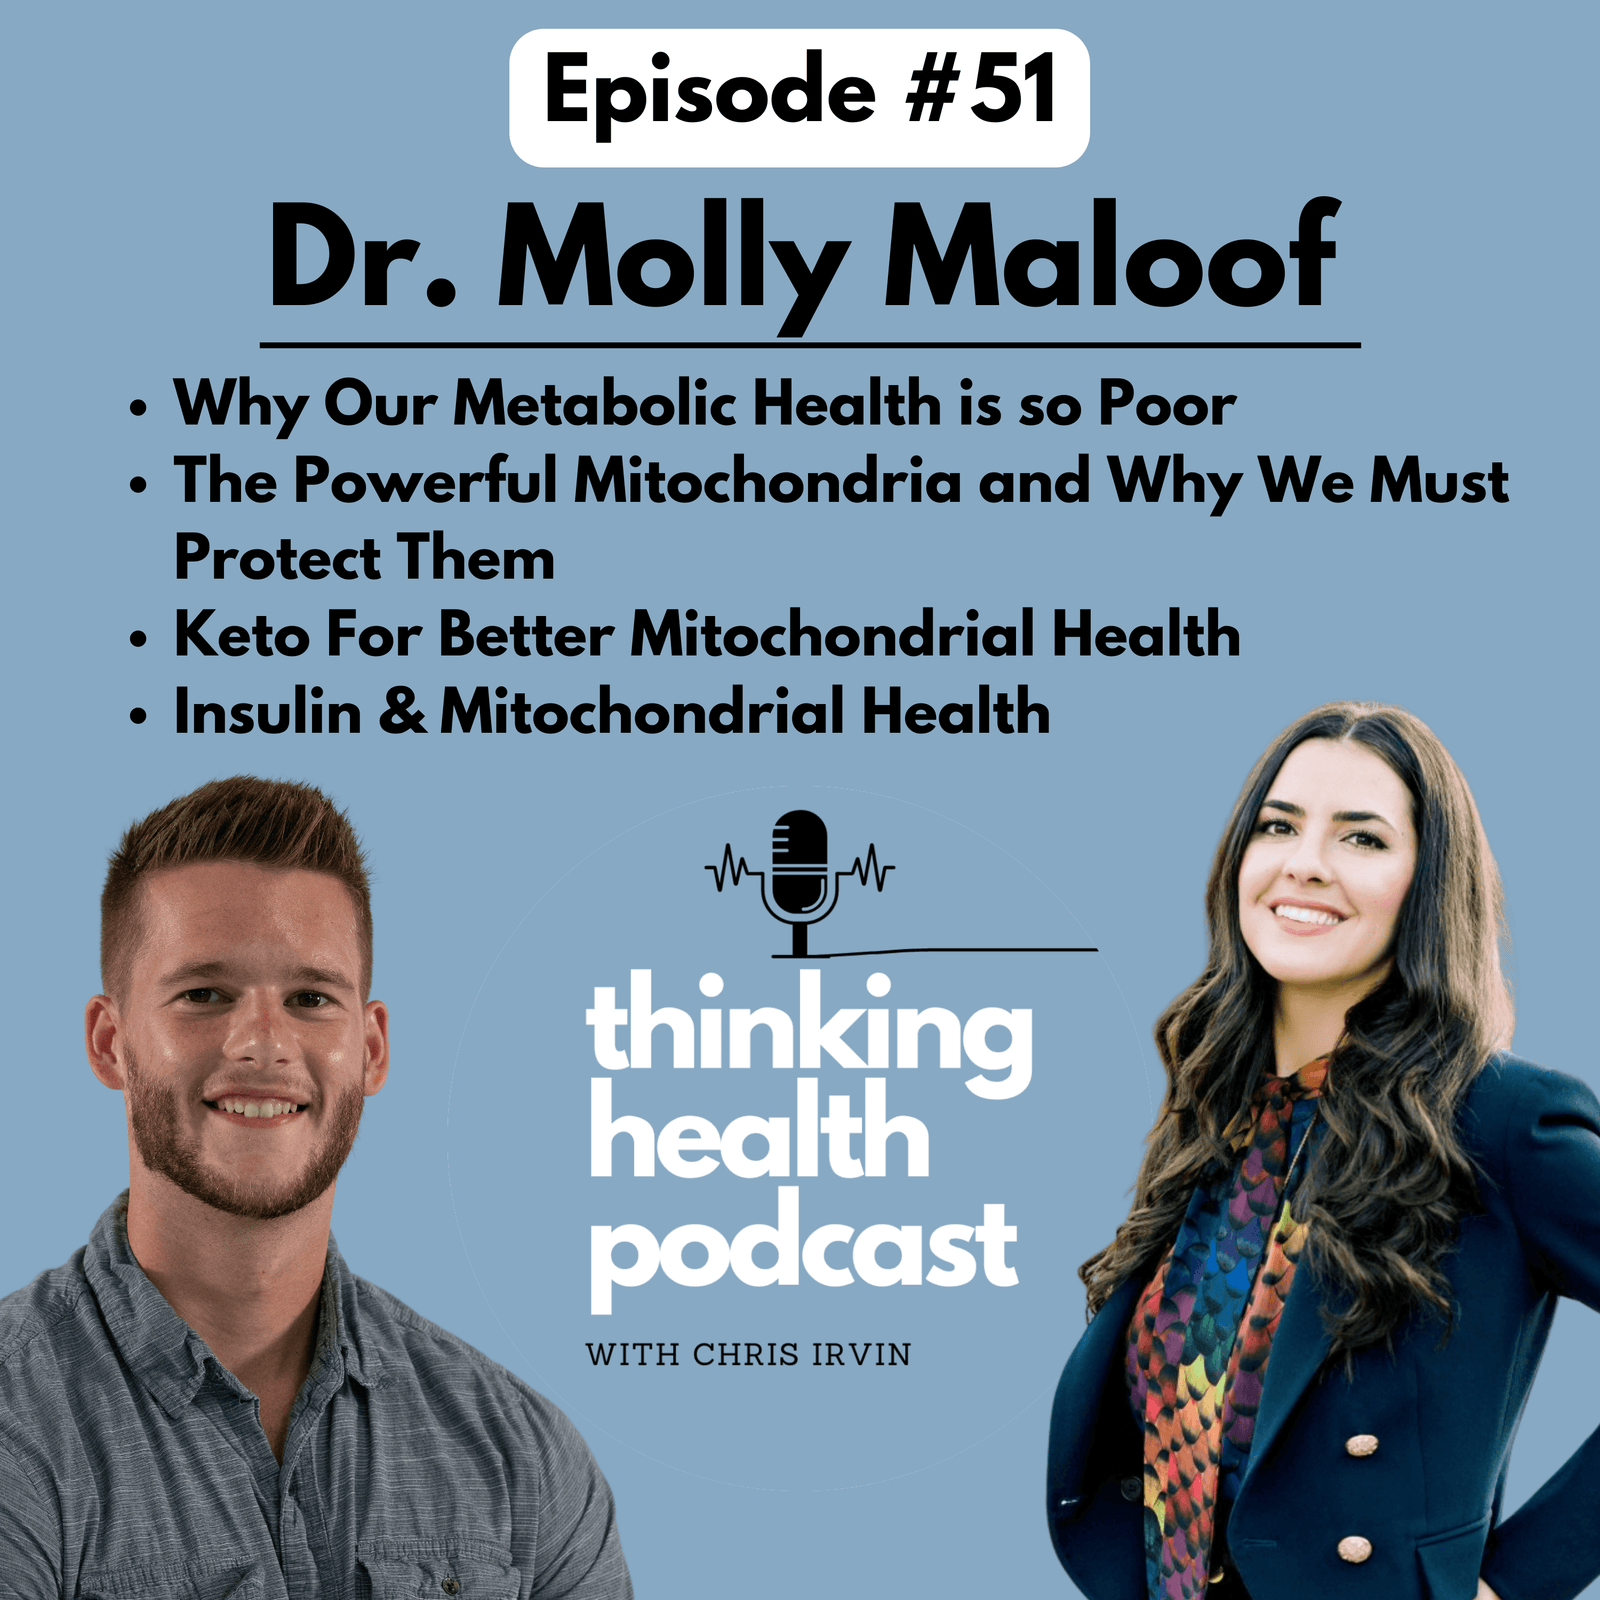 Episode #51: Dr. Molly Maloof: The Powerful Mitochondria & Why We Have to Protect Them - BioCoach